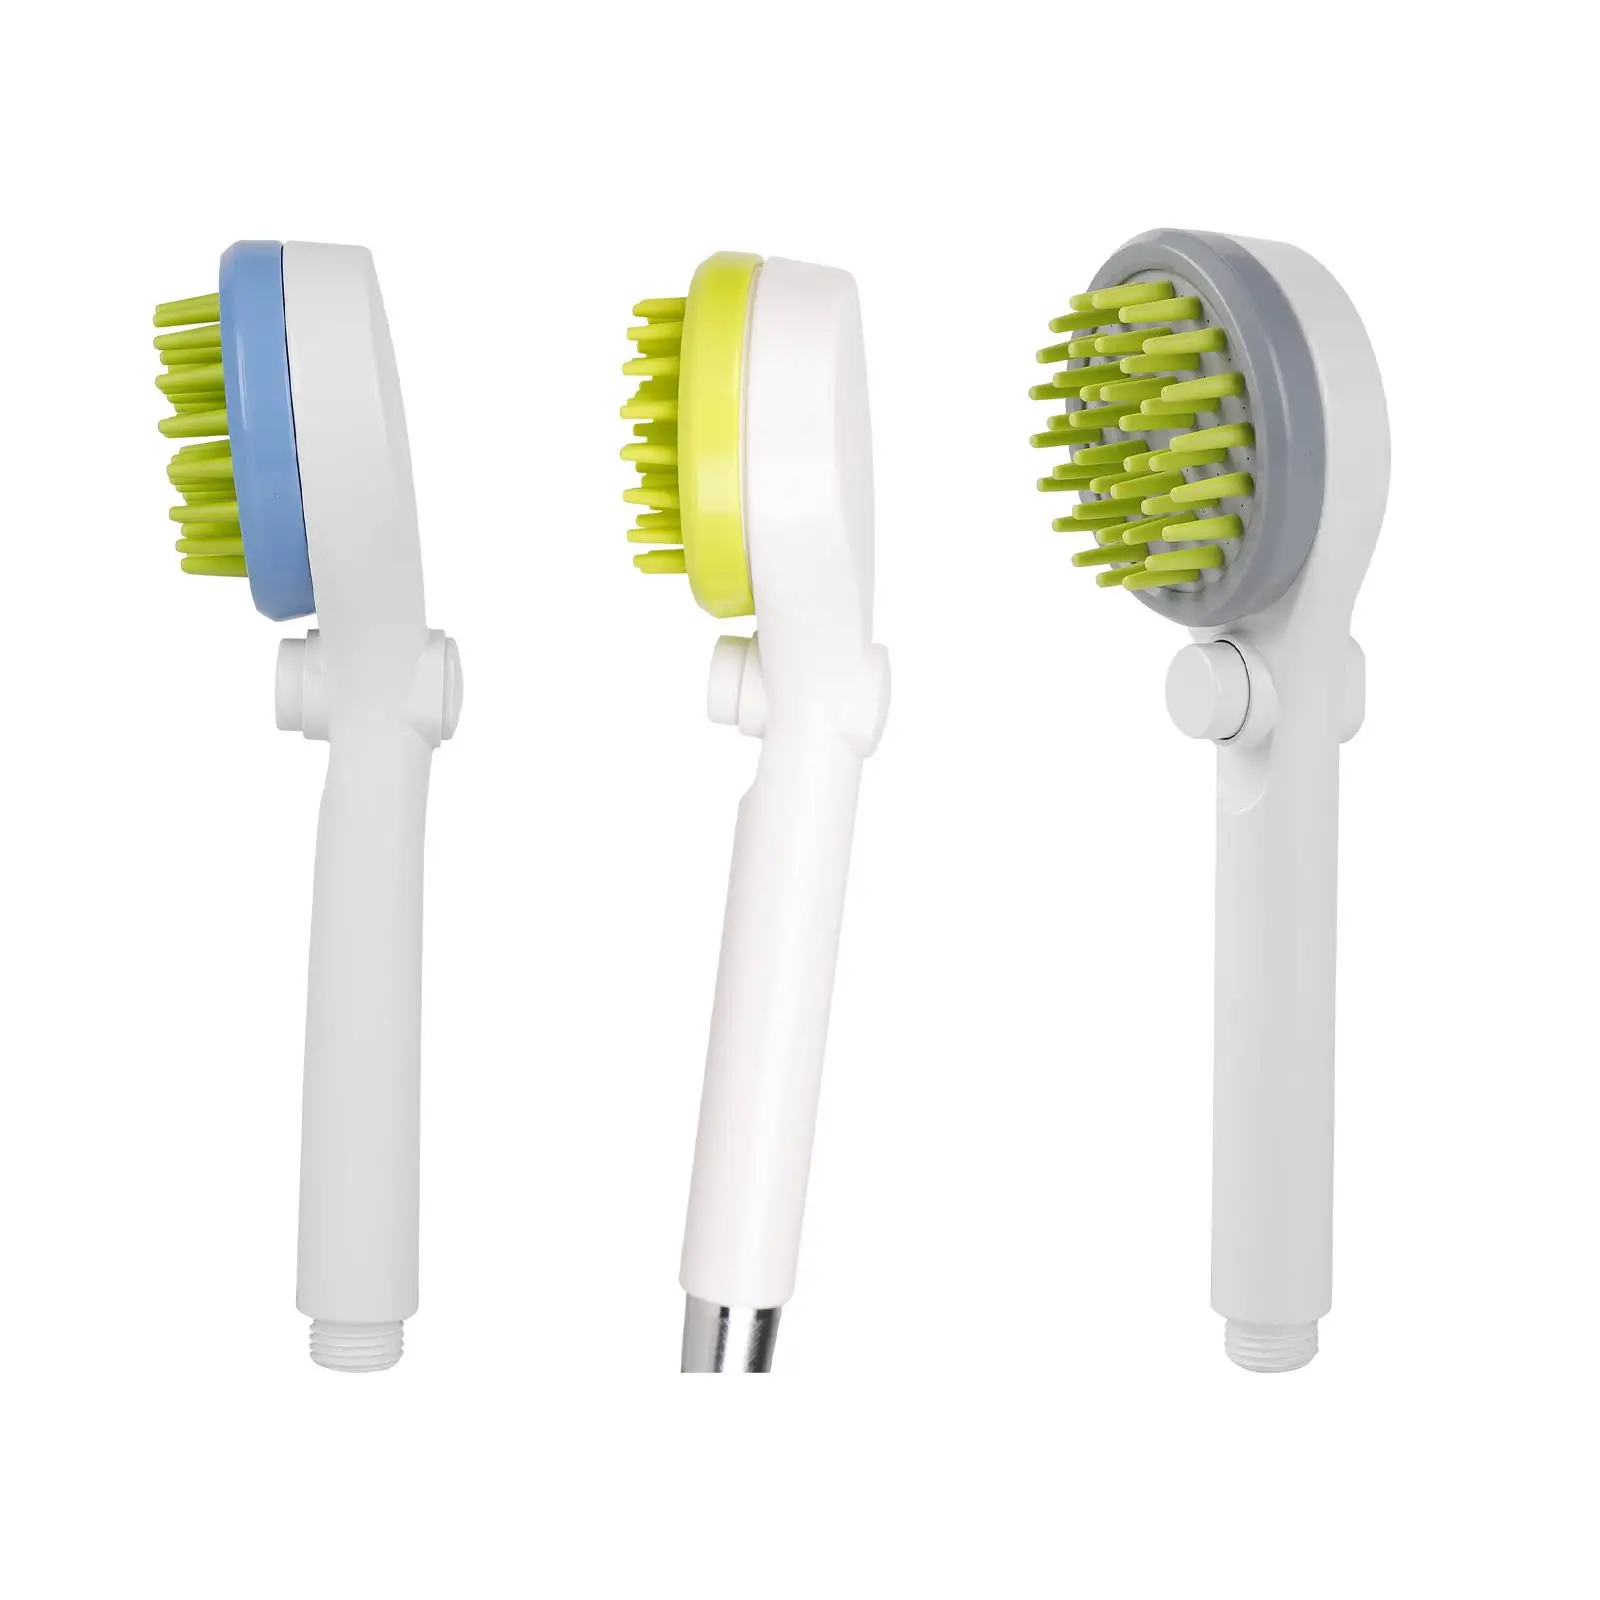 Portable Pet Comb Washer Accessories Sprinkler Grooming Comb Scrubber Shower Comb for Massaging Washing SPA Puppy Kitten